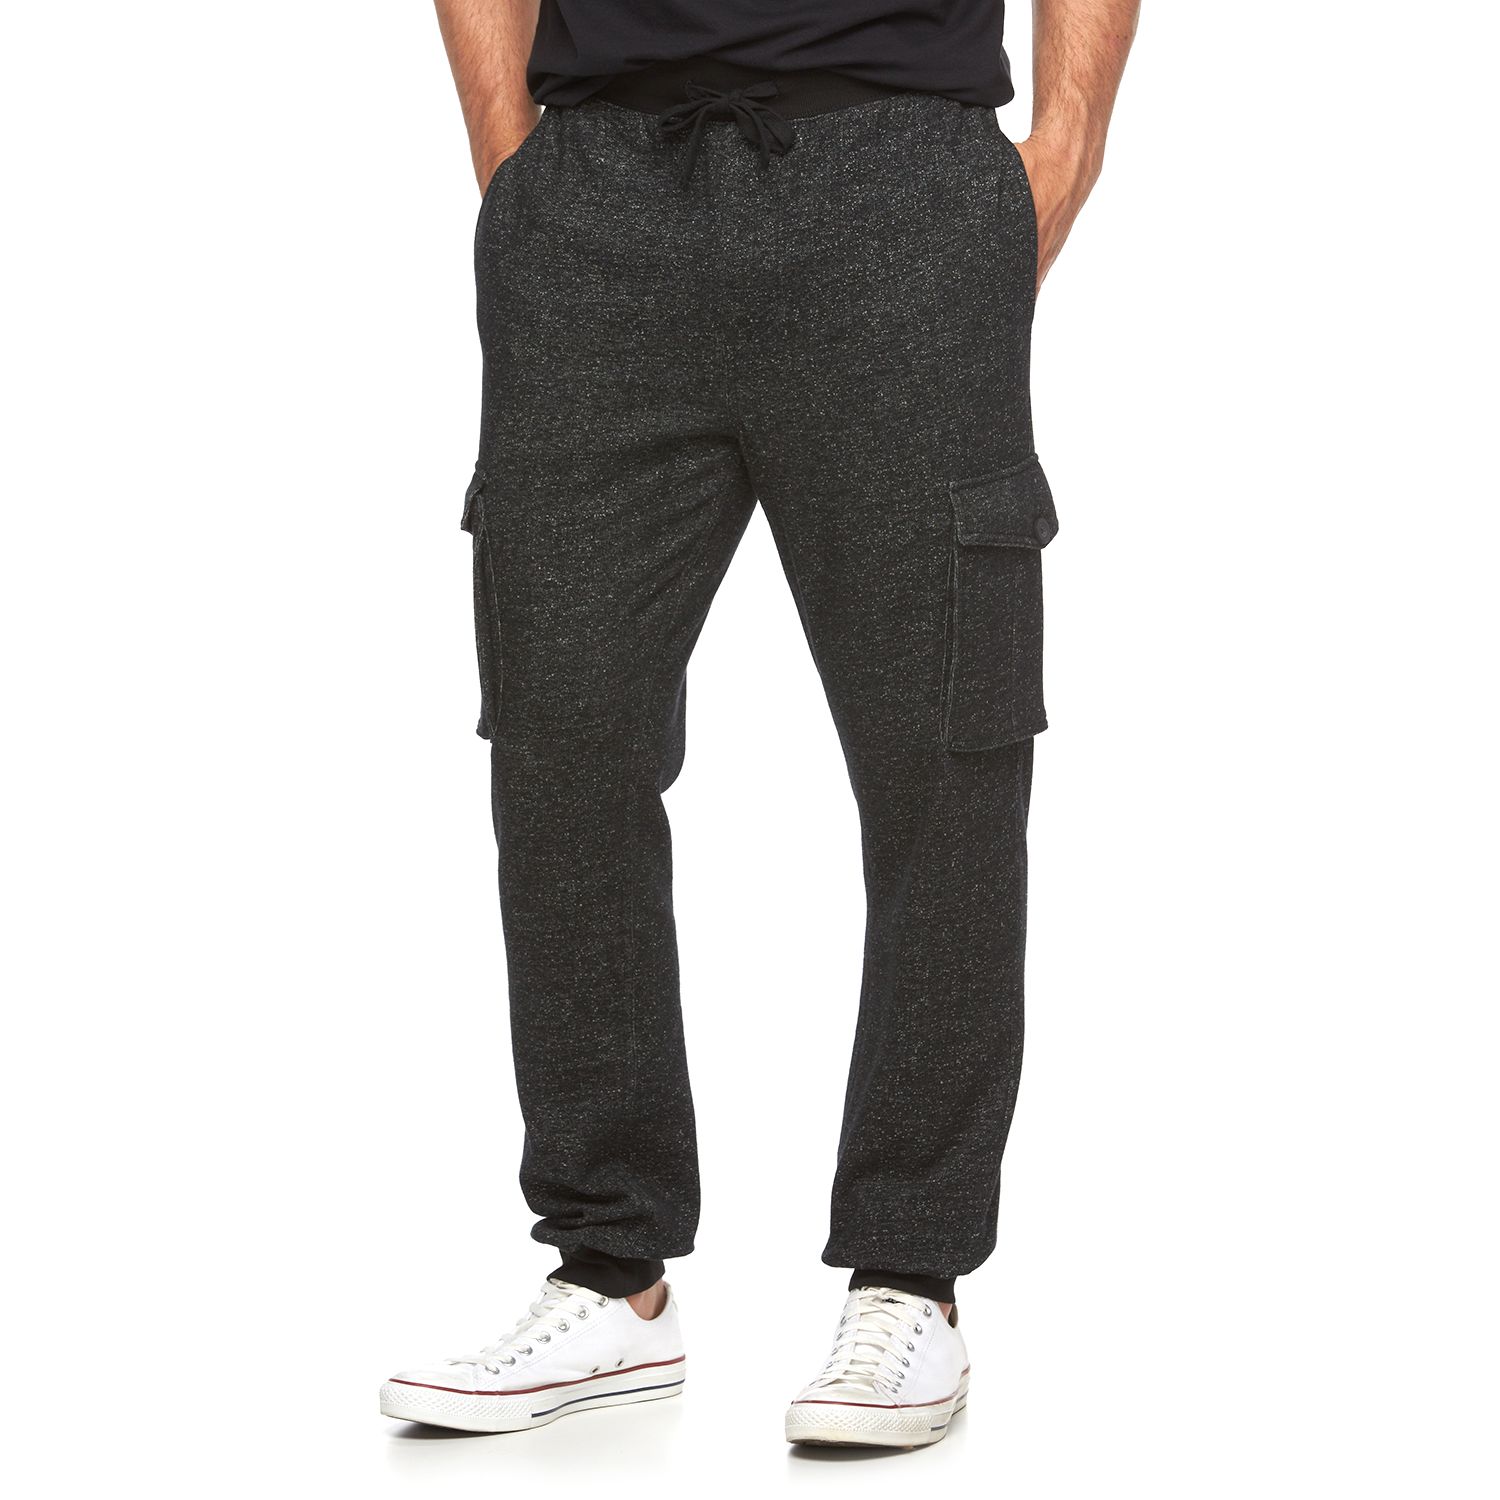 softwill cargo pants